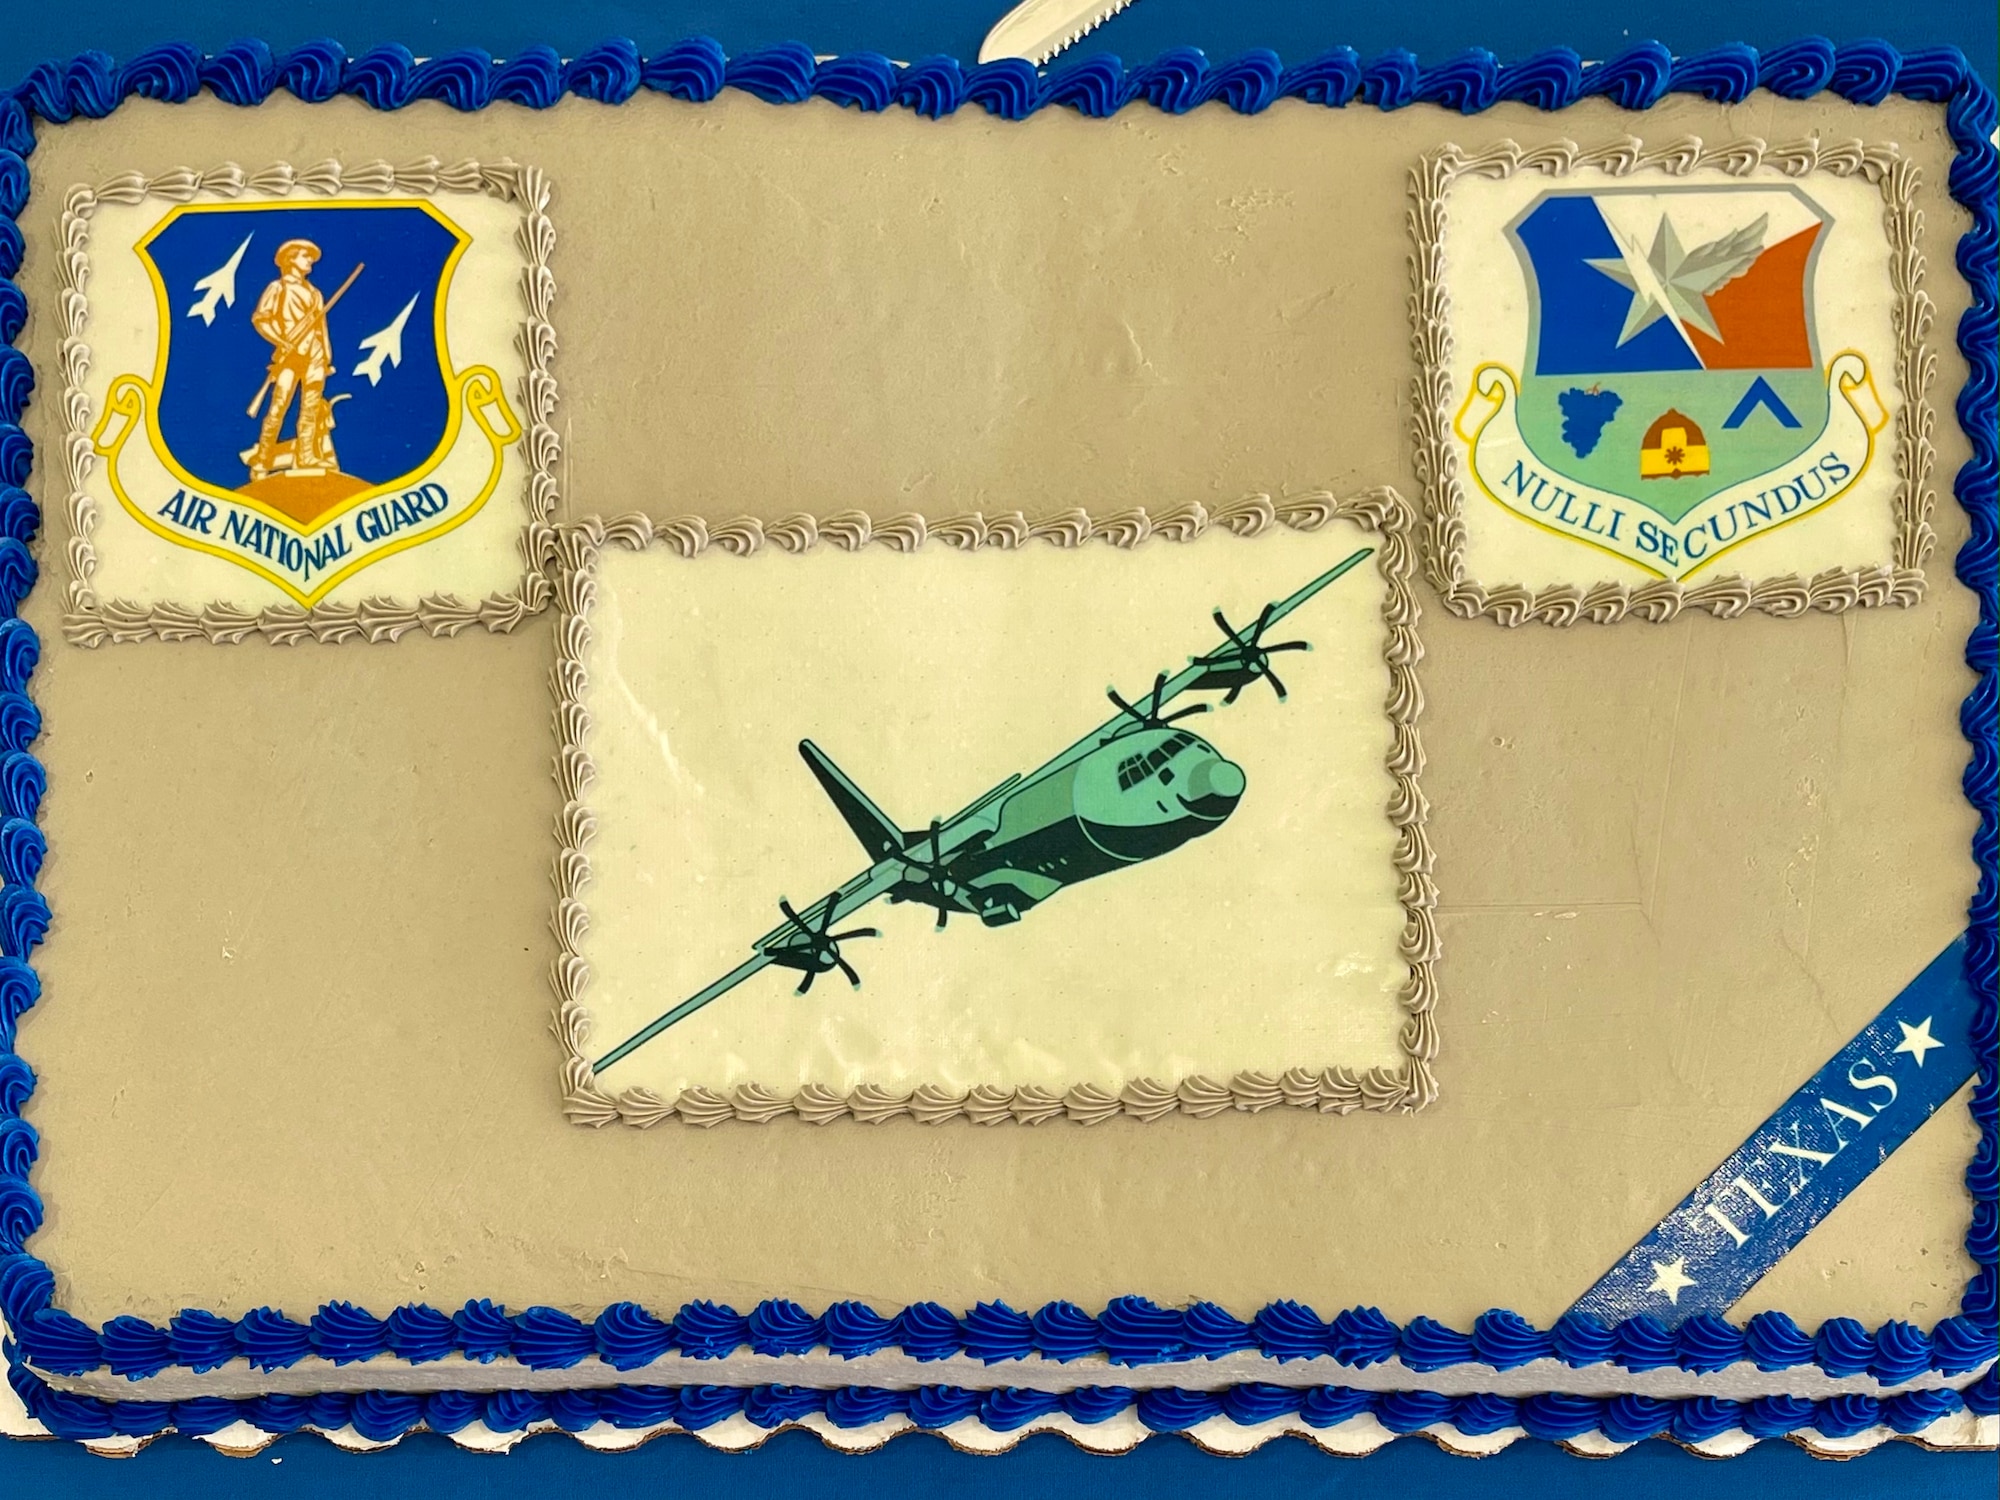 Sheet cake for C-130J Welcoming Reception